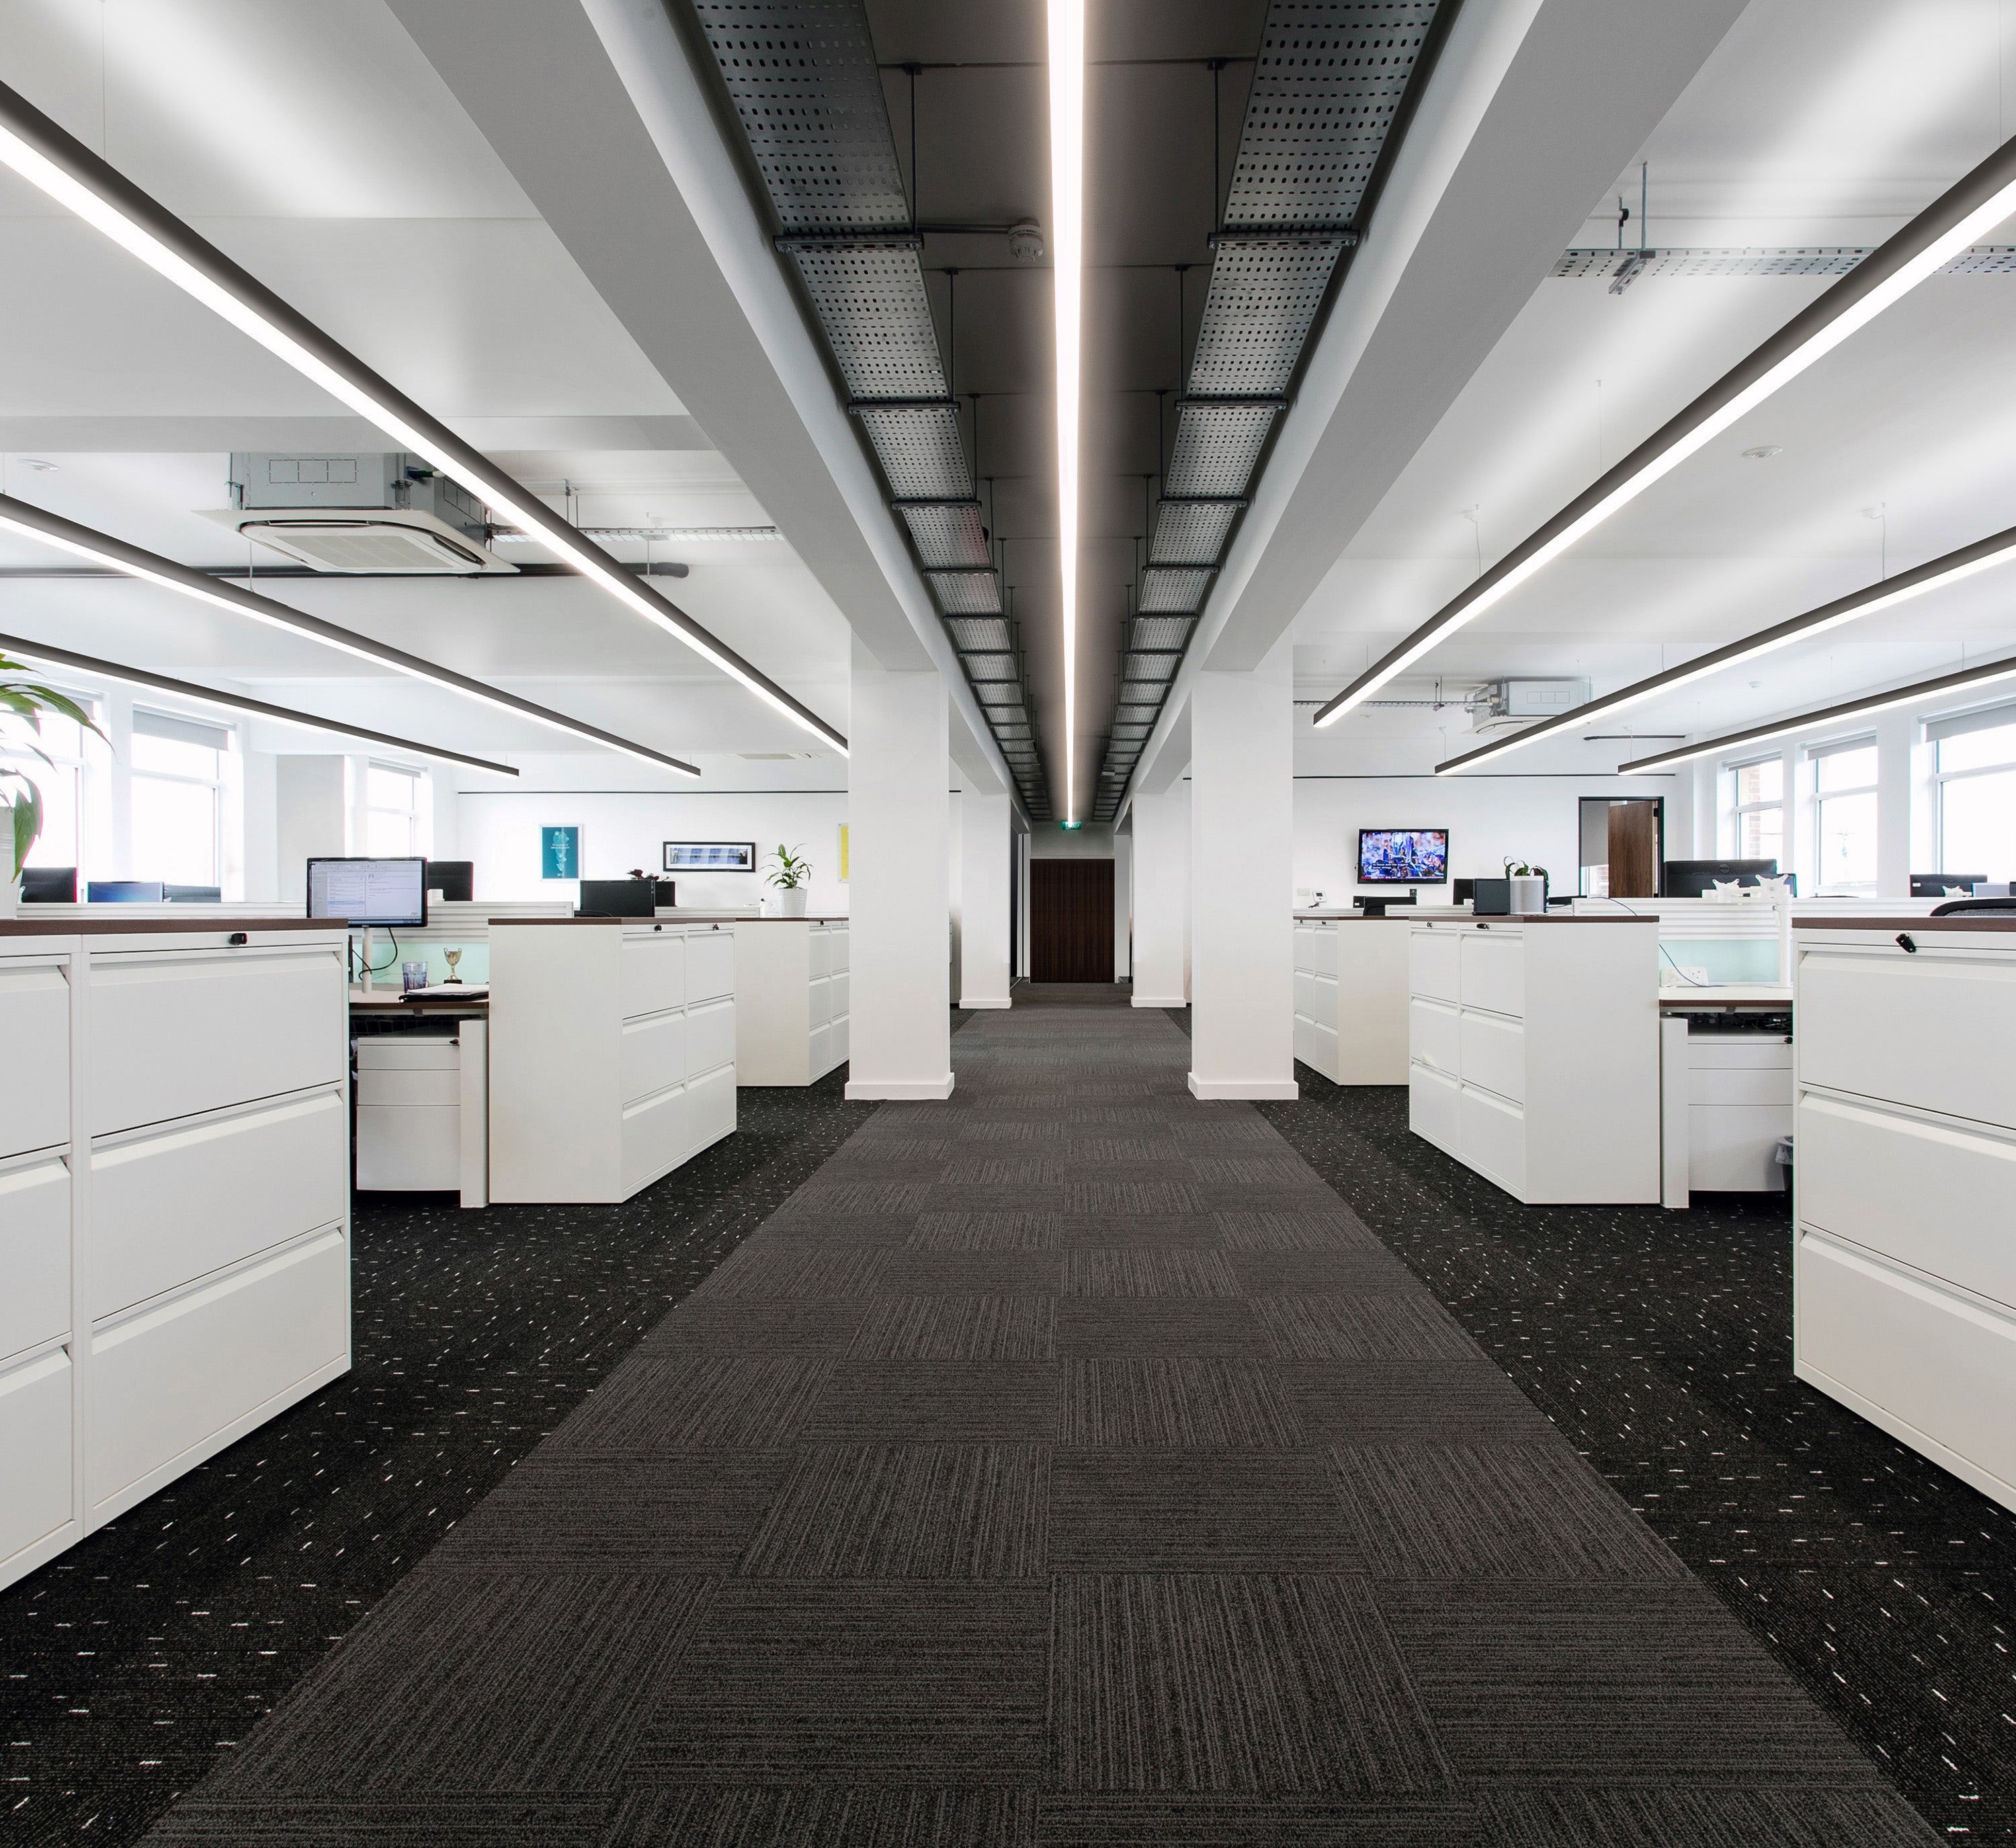 Spacious and brightly lit modern office interior with linear LED lights embedded in the ceiling, reflecting on the glossy white desks below. The room is lined with large windows, and green potted plants add a touch of nature to the workplace. The office design combines a minimalist aesthetic with a functional layout, featuring ergonomic chairs and organized workstations.